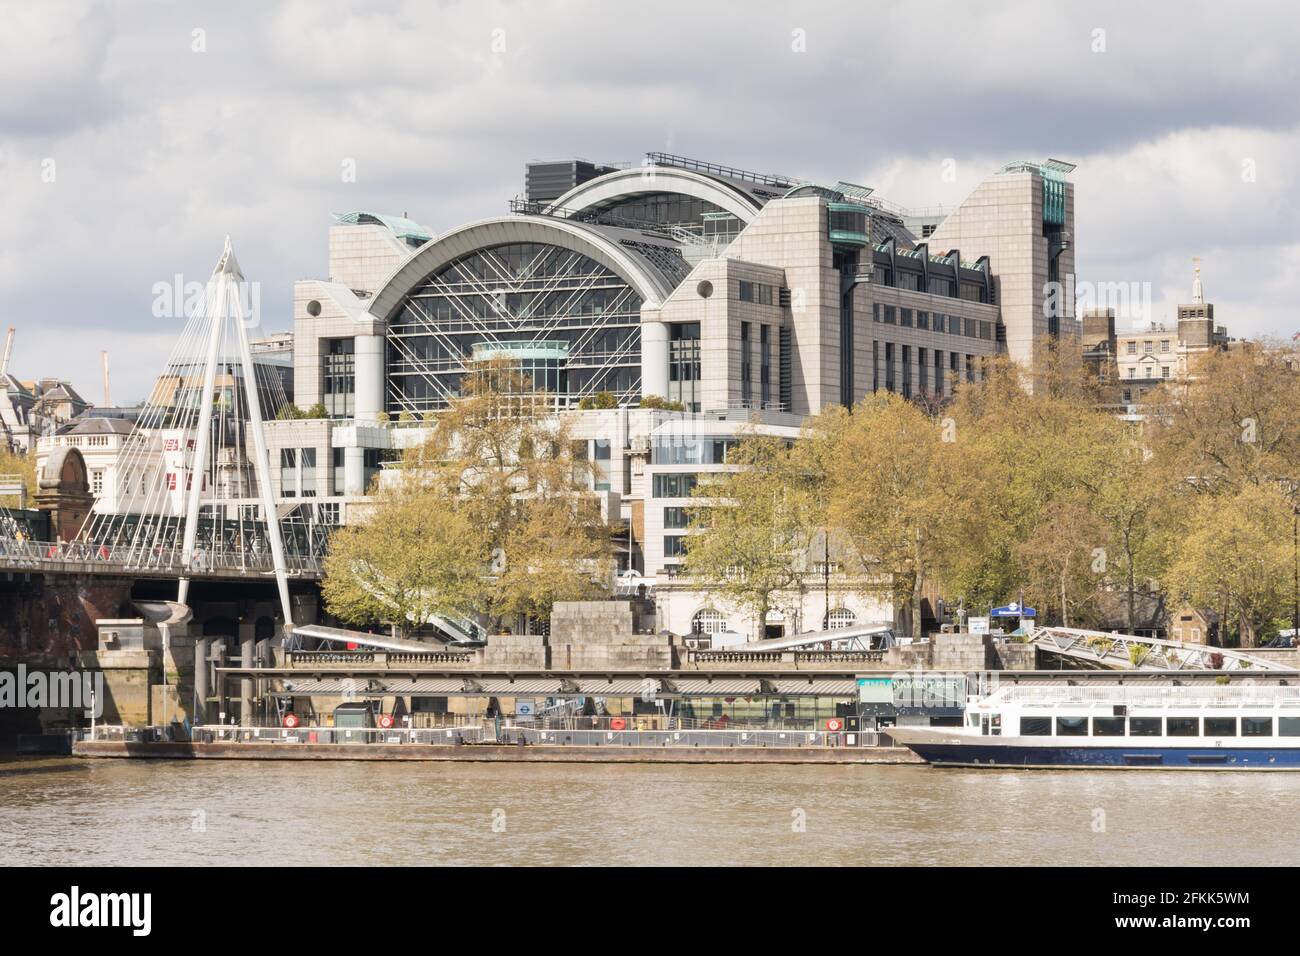 A sunlit Charing Cross station, on the Victoria Embankment, with the Embankment landing stage on the River Thames in the foreground. Stock Photo